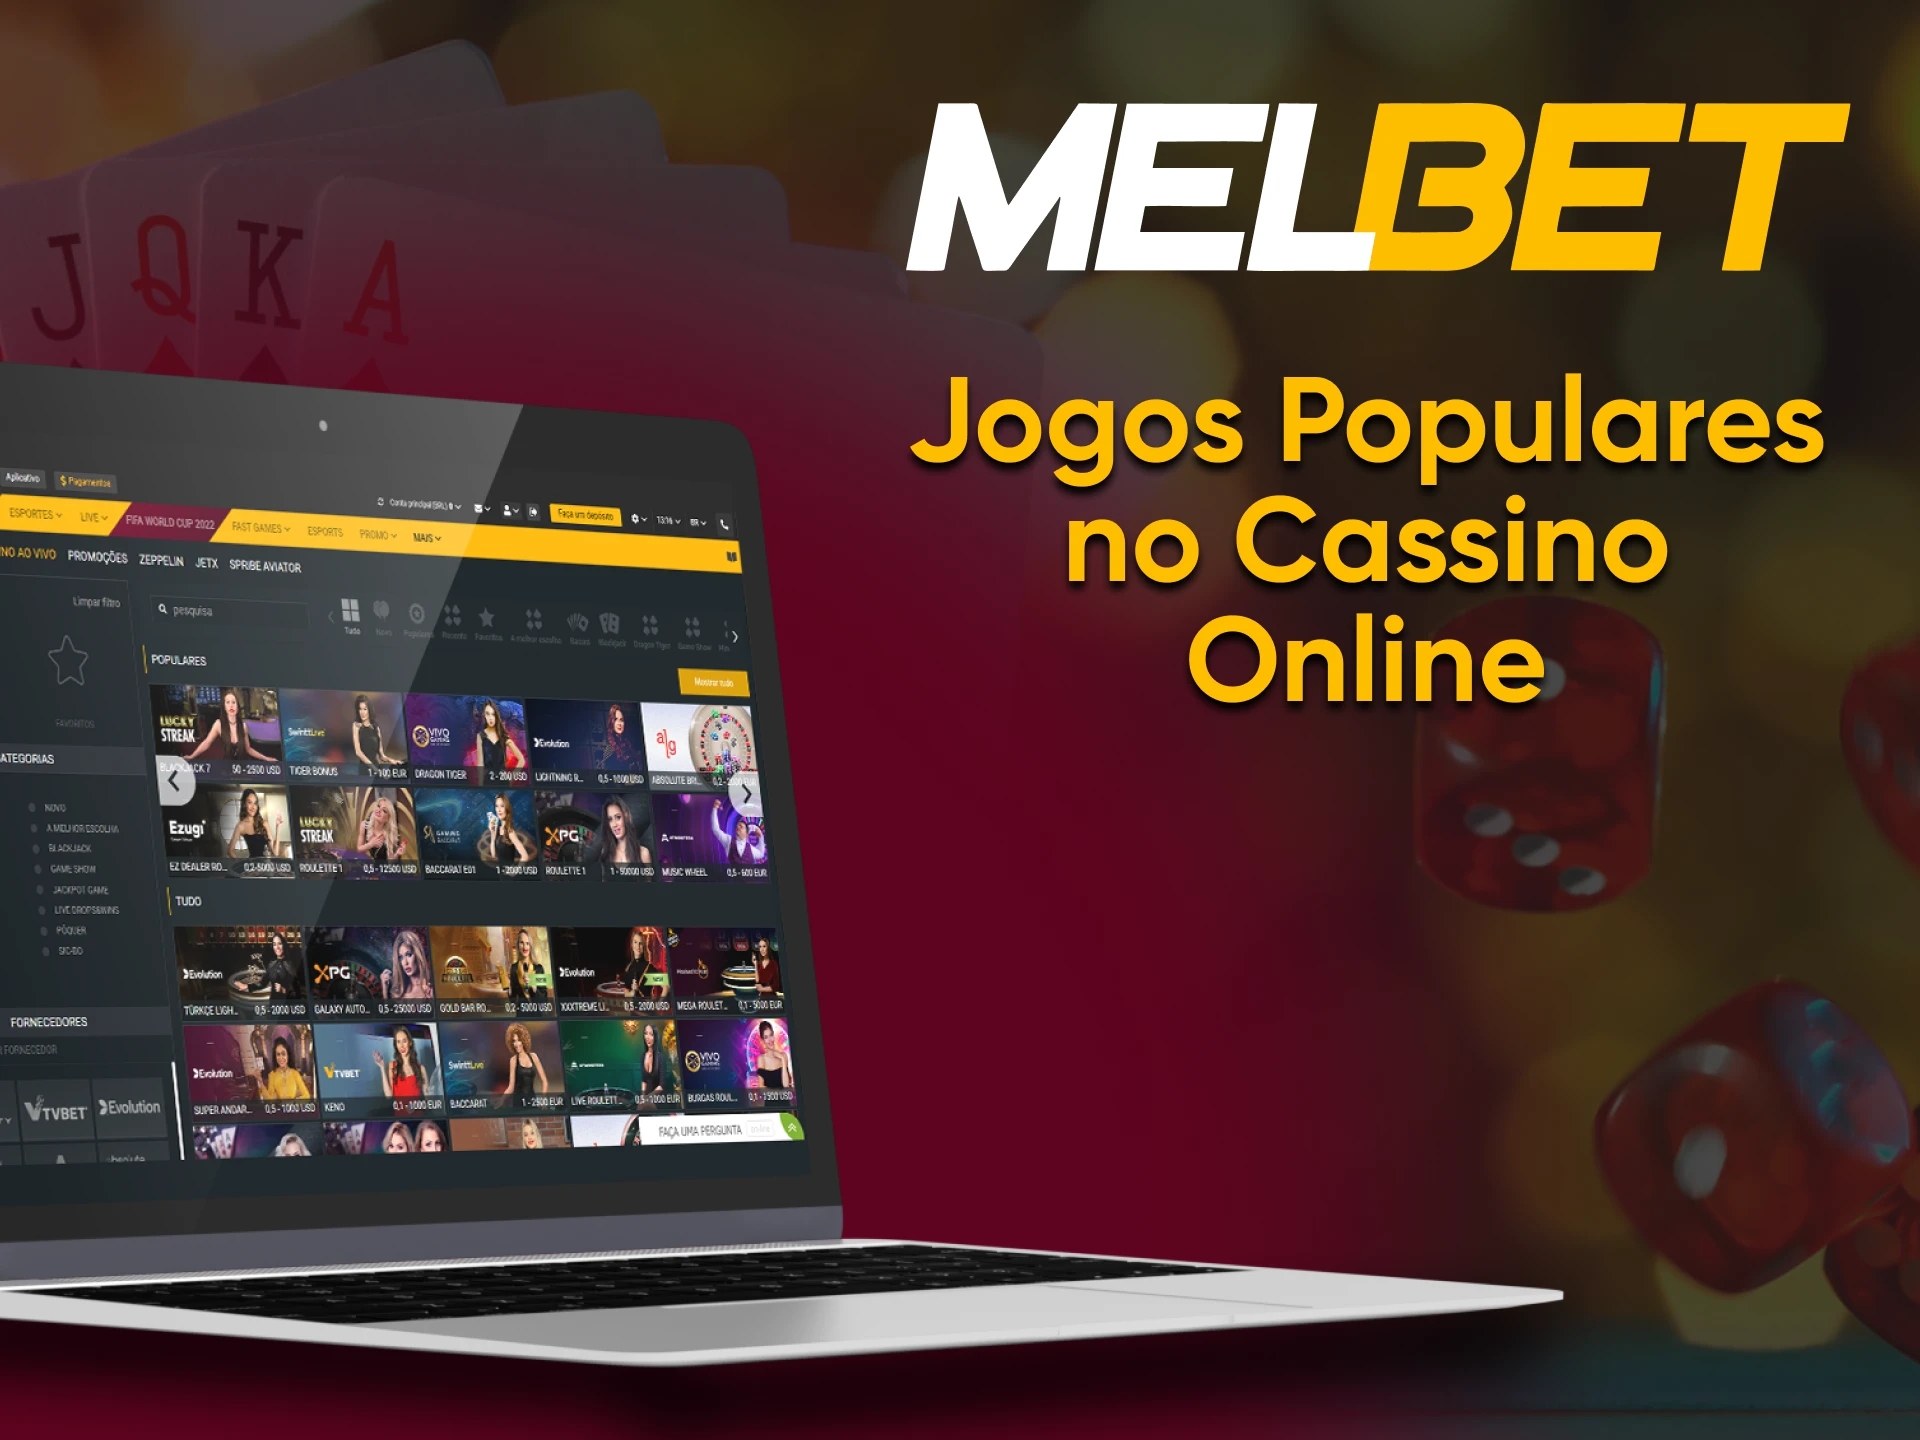 On the Melbet website, you can bet on casino games.